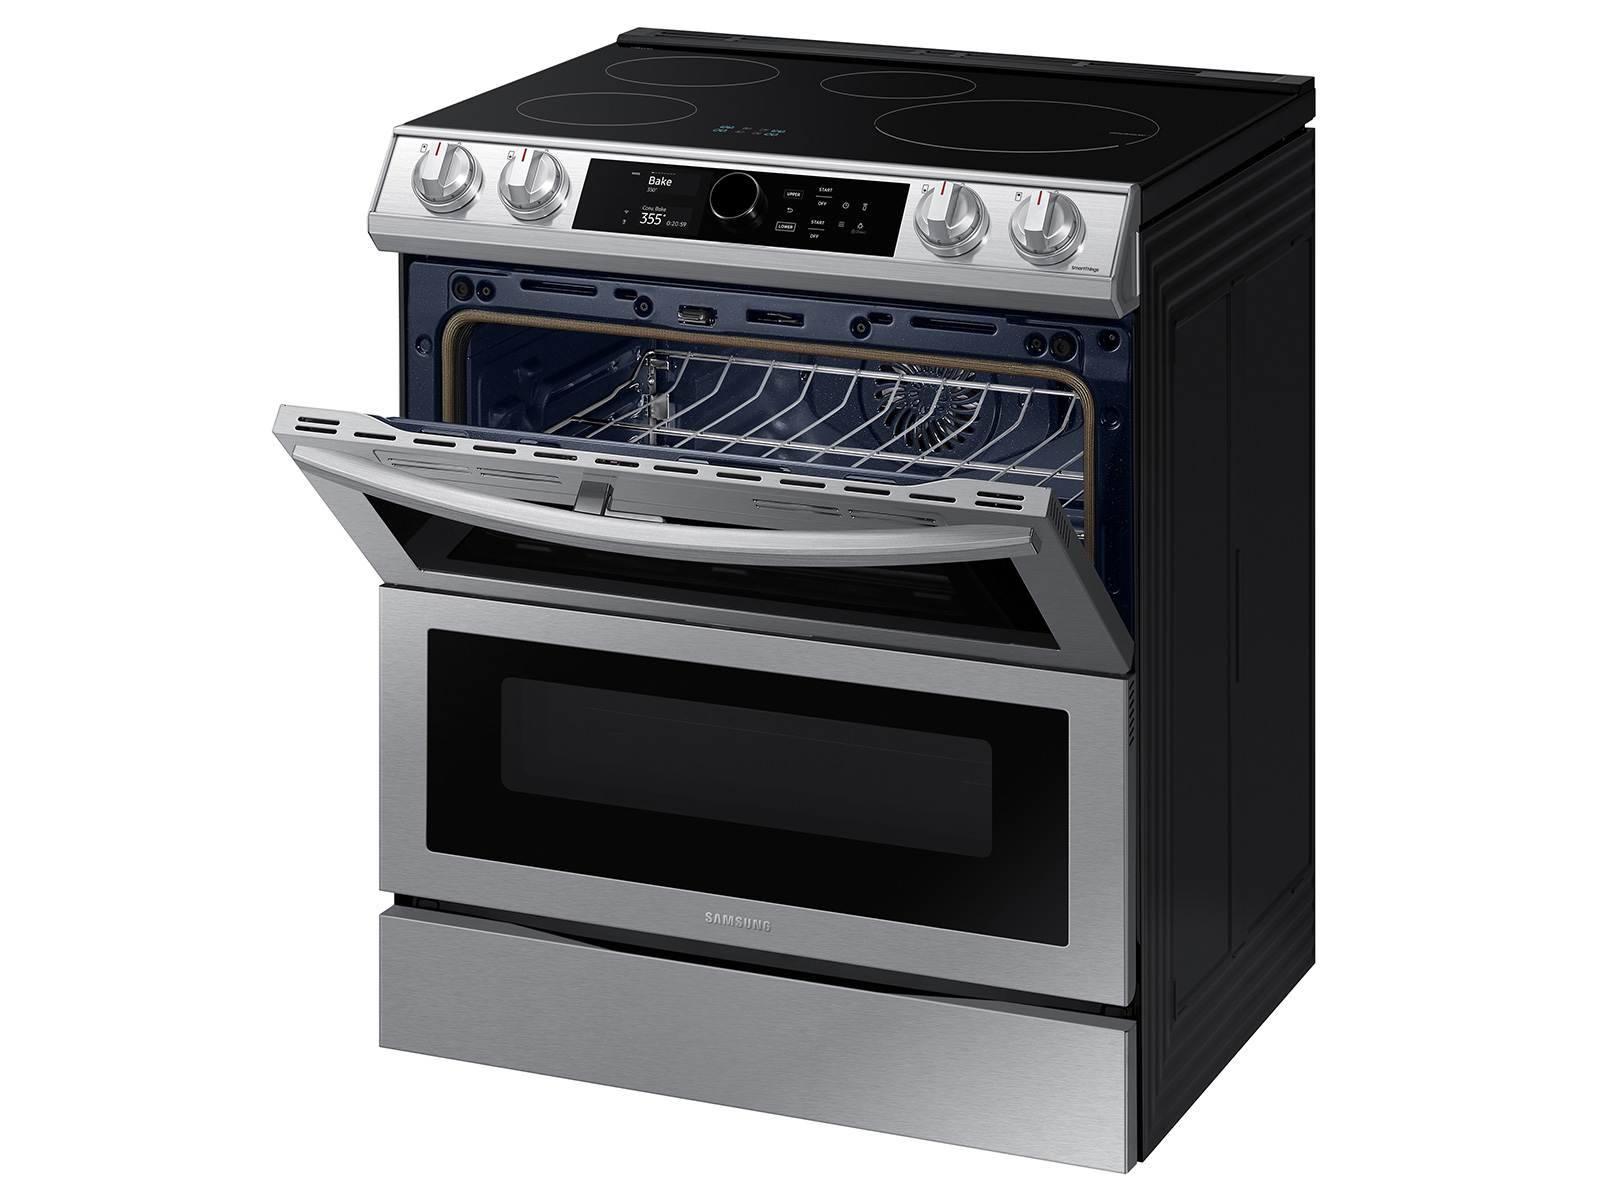 GE Appliances Launches New Induction Cooktop Line-Up Packed with